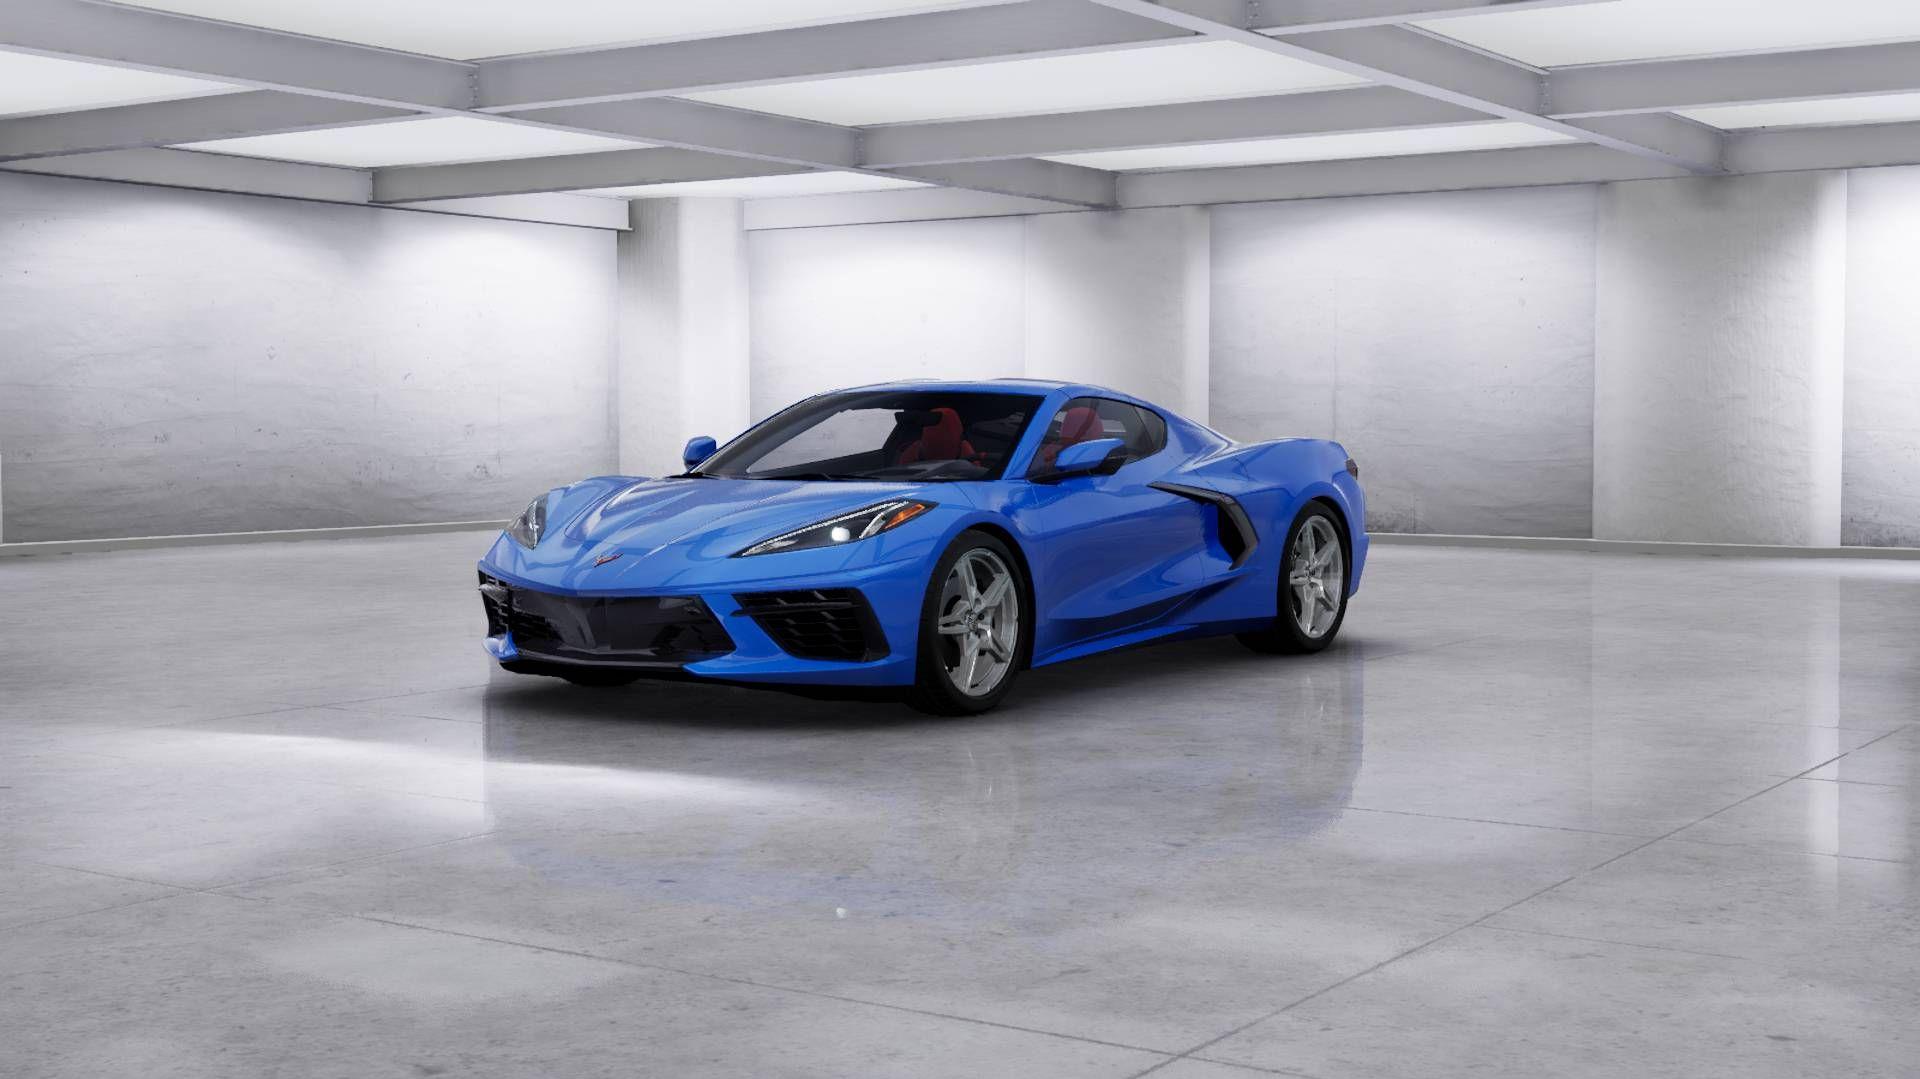 See the 2020 Chevy Corvette in Every Color Available